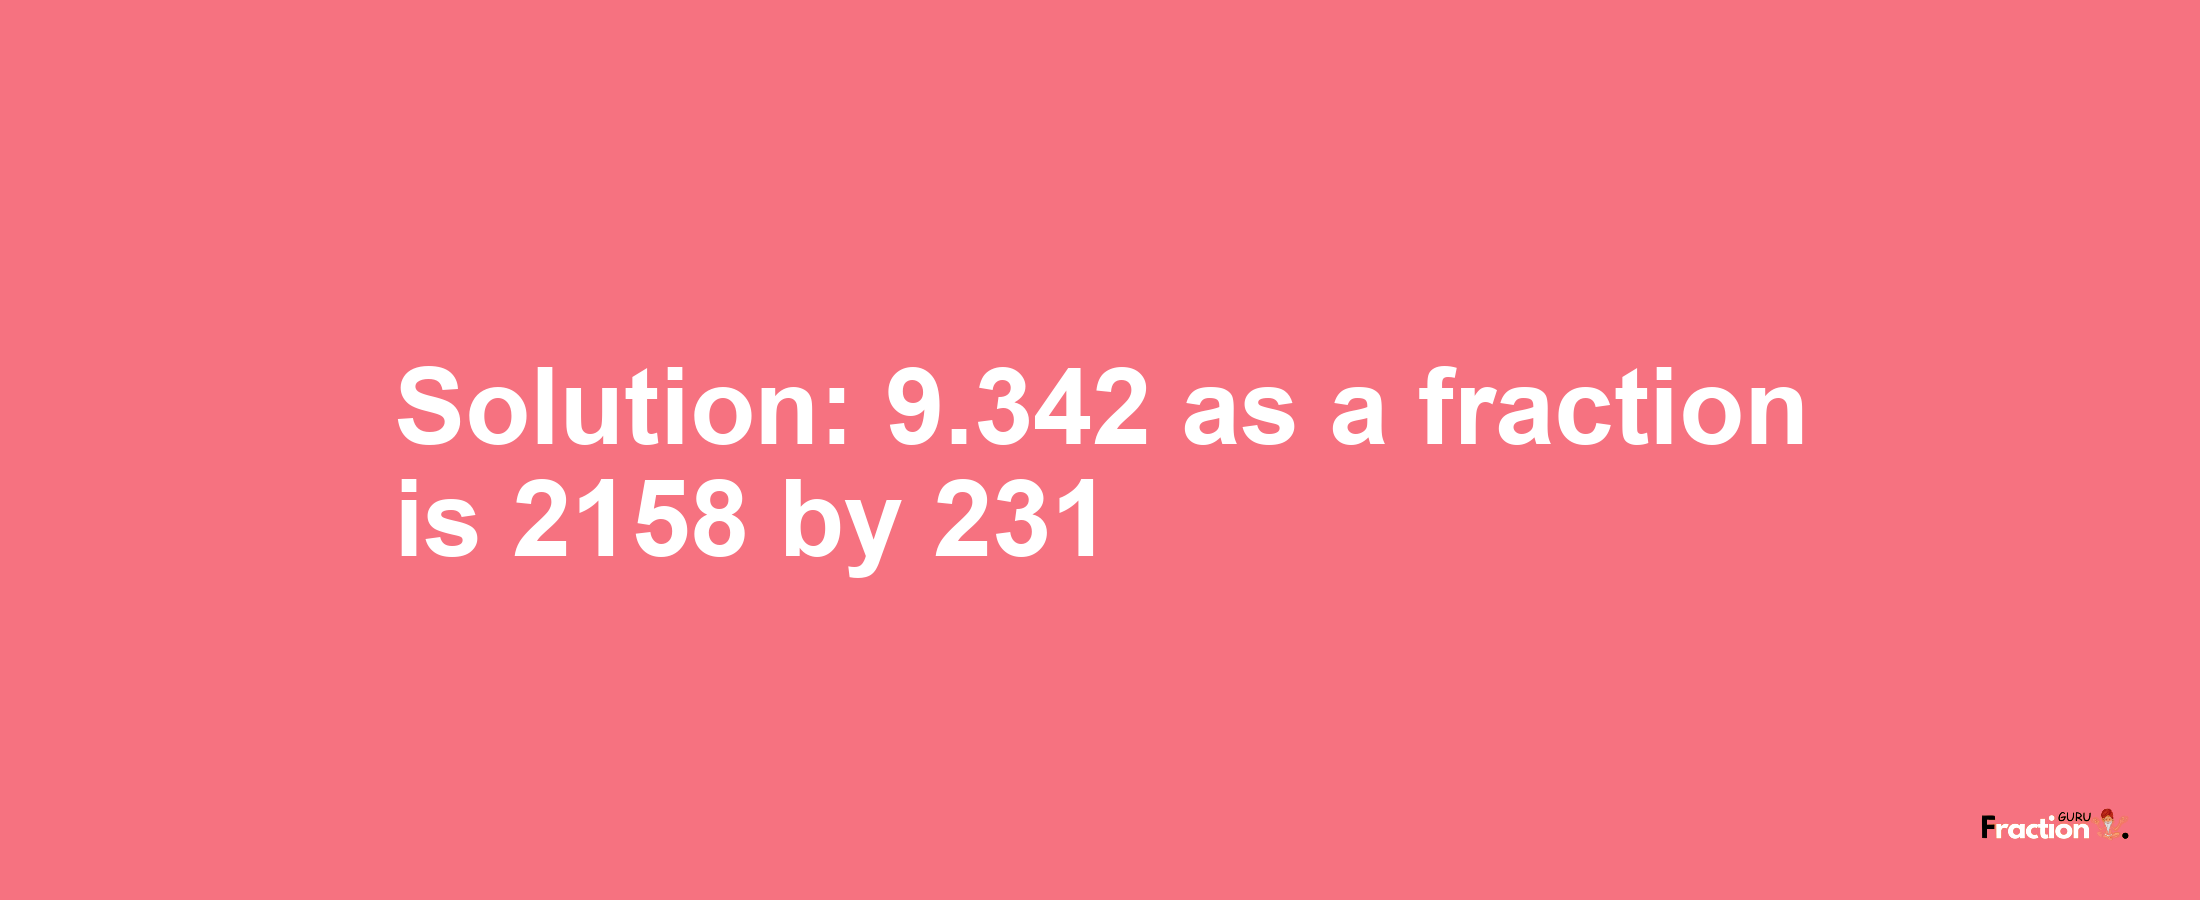 Solution:9.342 as a fraction is 2158/231